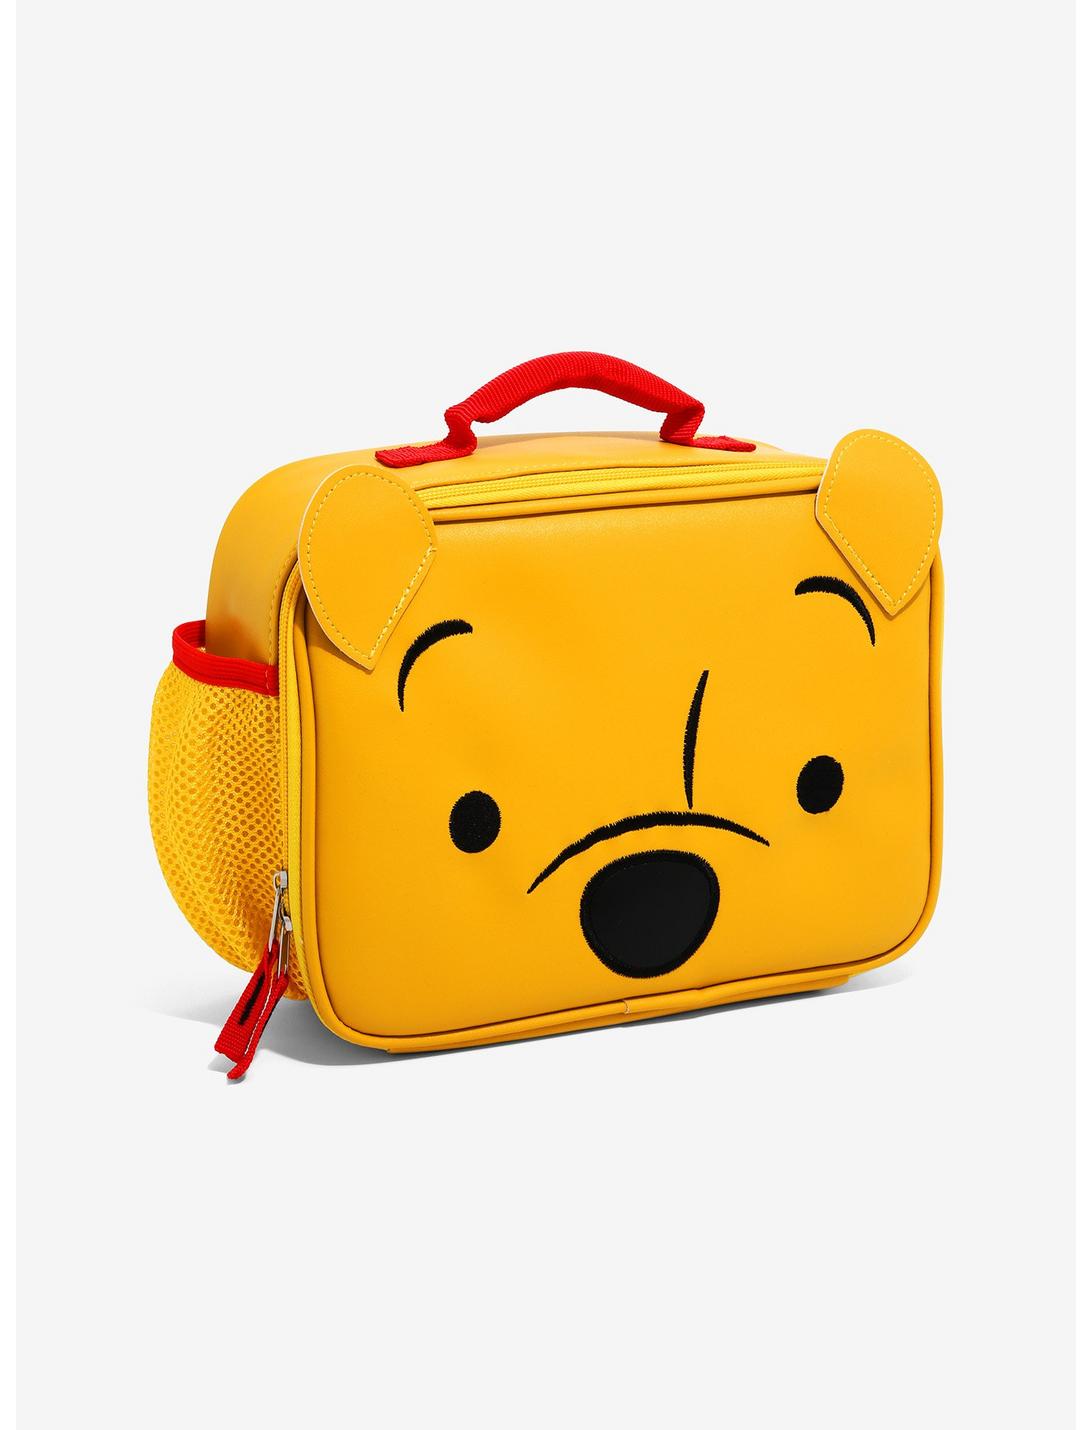 Disney Winnie the Pooh Pooh Bear Figural Lunch Box - BoxLunch Exclusive, , hi-res